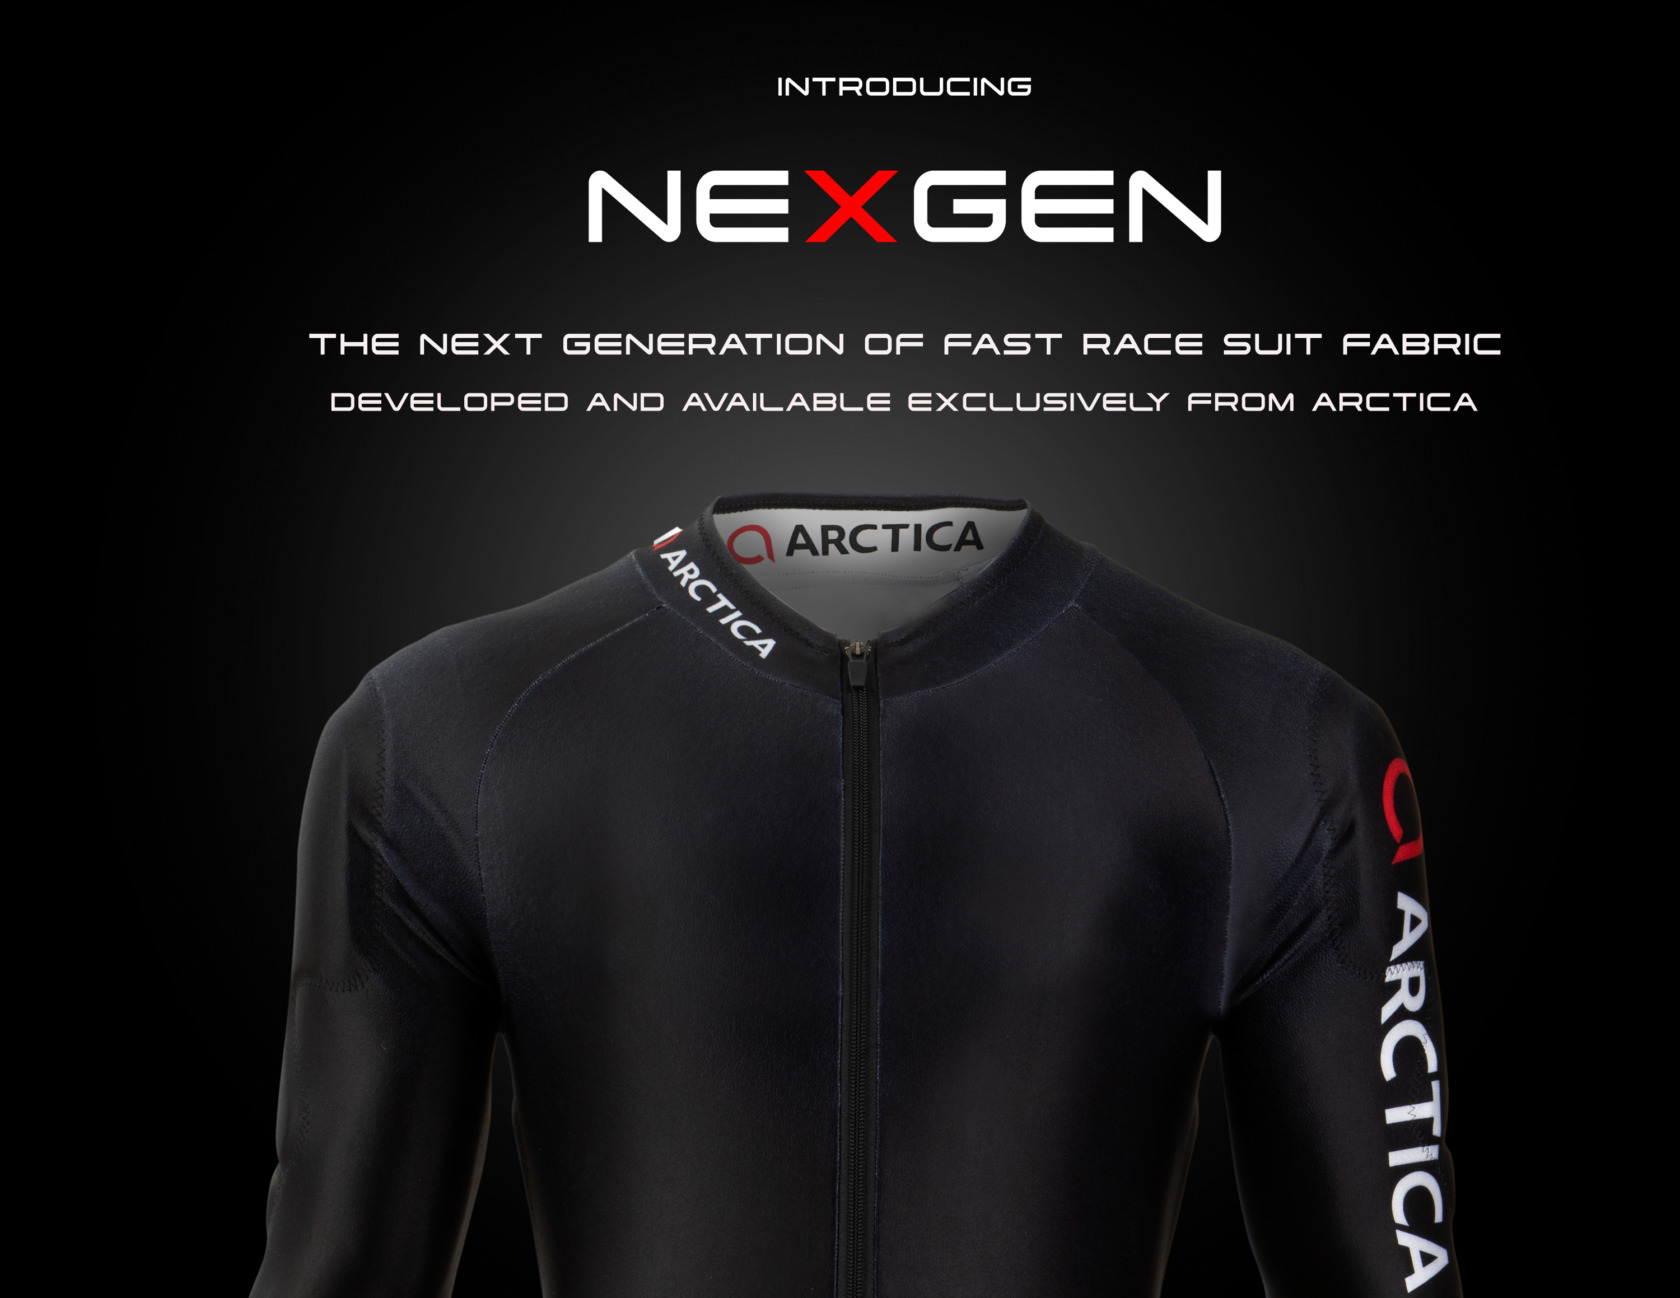 The next generation of fast race suit fabric developed and available exclusively from arctica